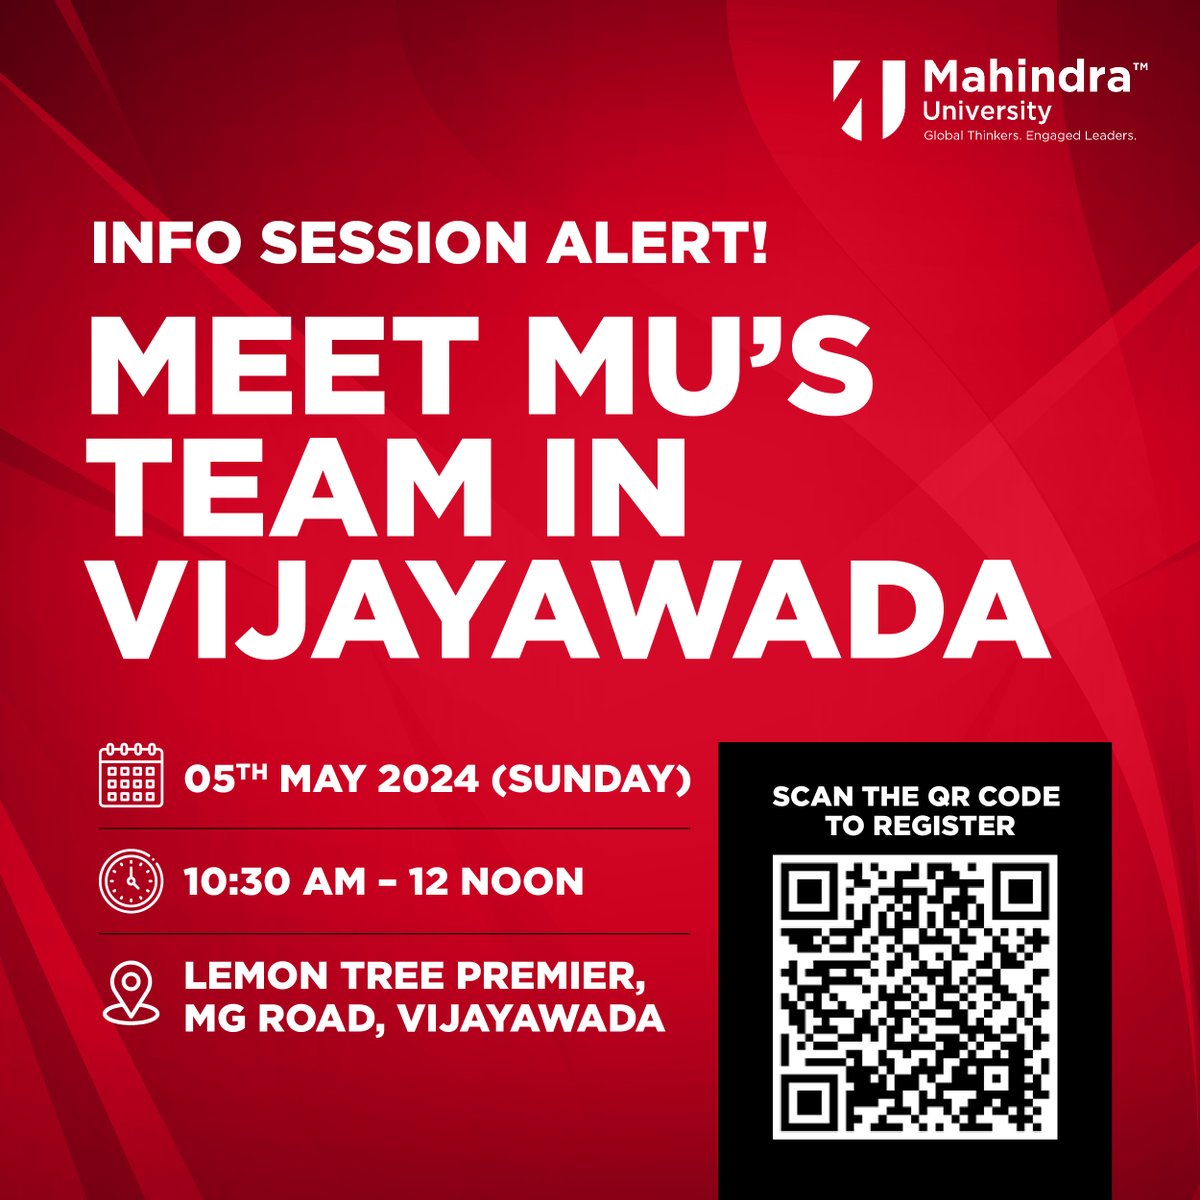 Join #MahindraUniversity's Admissions Team for an info session and get all your questions answered about our programmes, scholarships, and campus life. 

Don't miss this chance to explore your academic journey with us! Scan the code to register now! 

#InfoSession